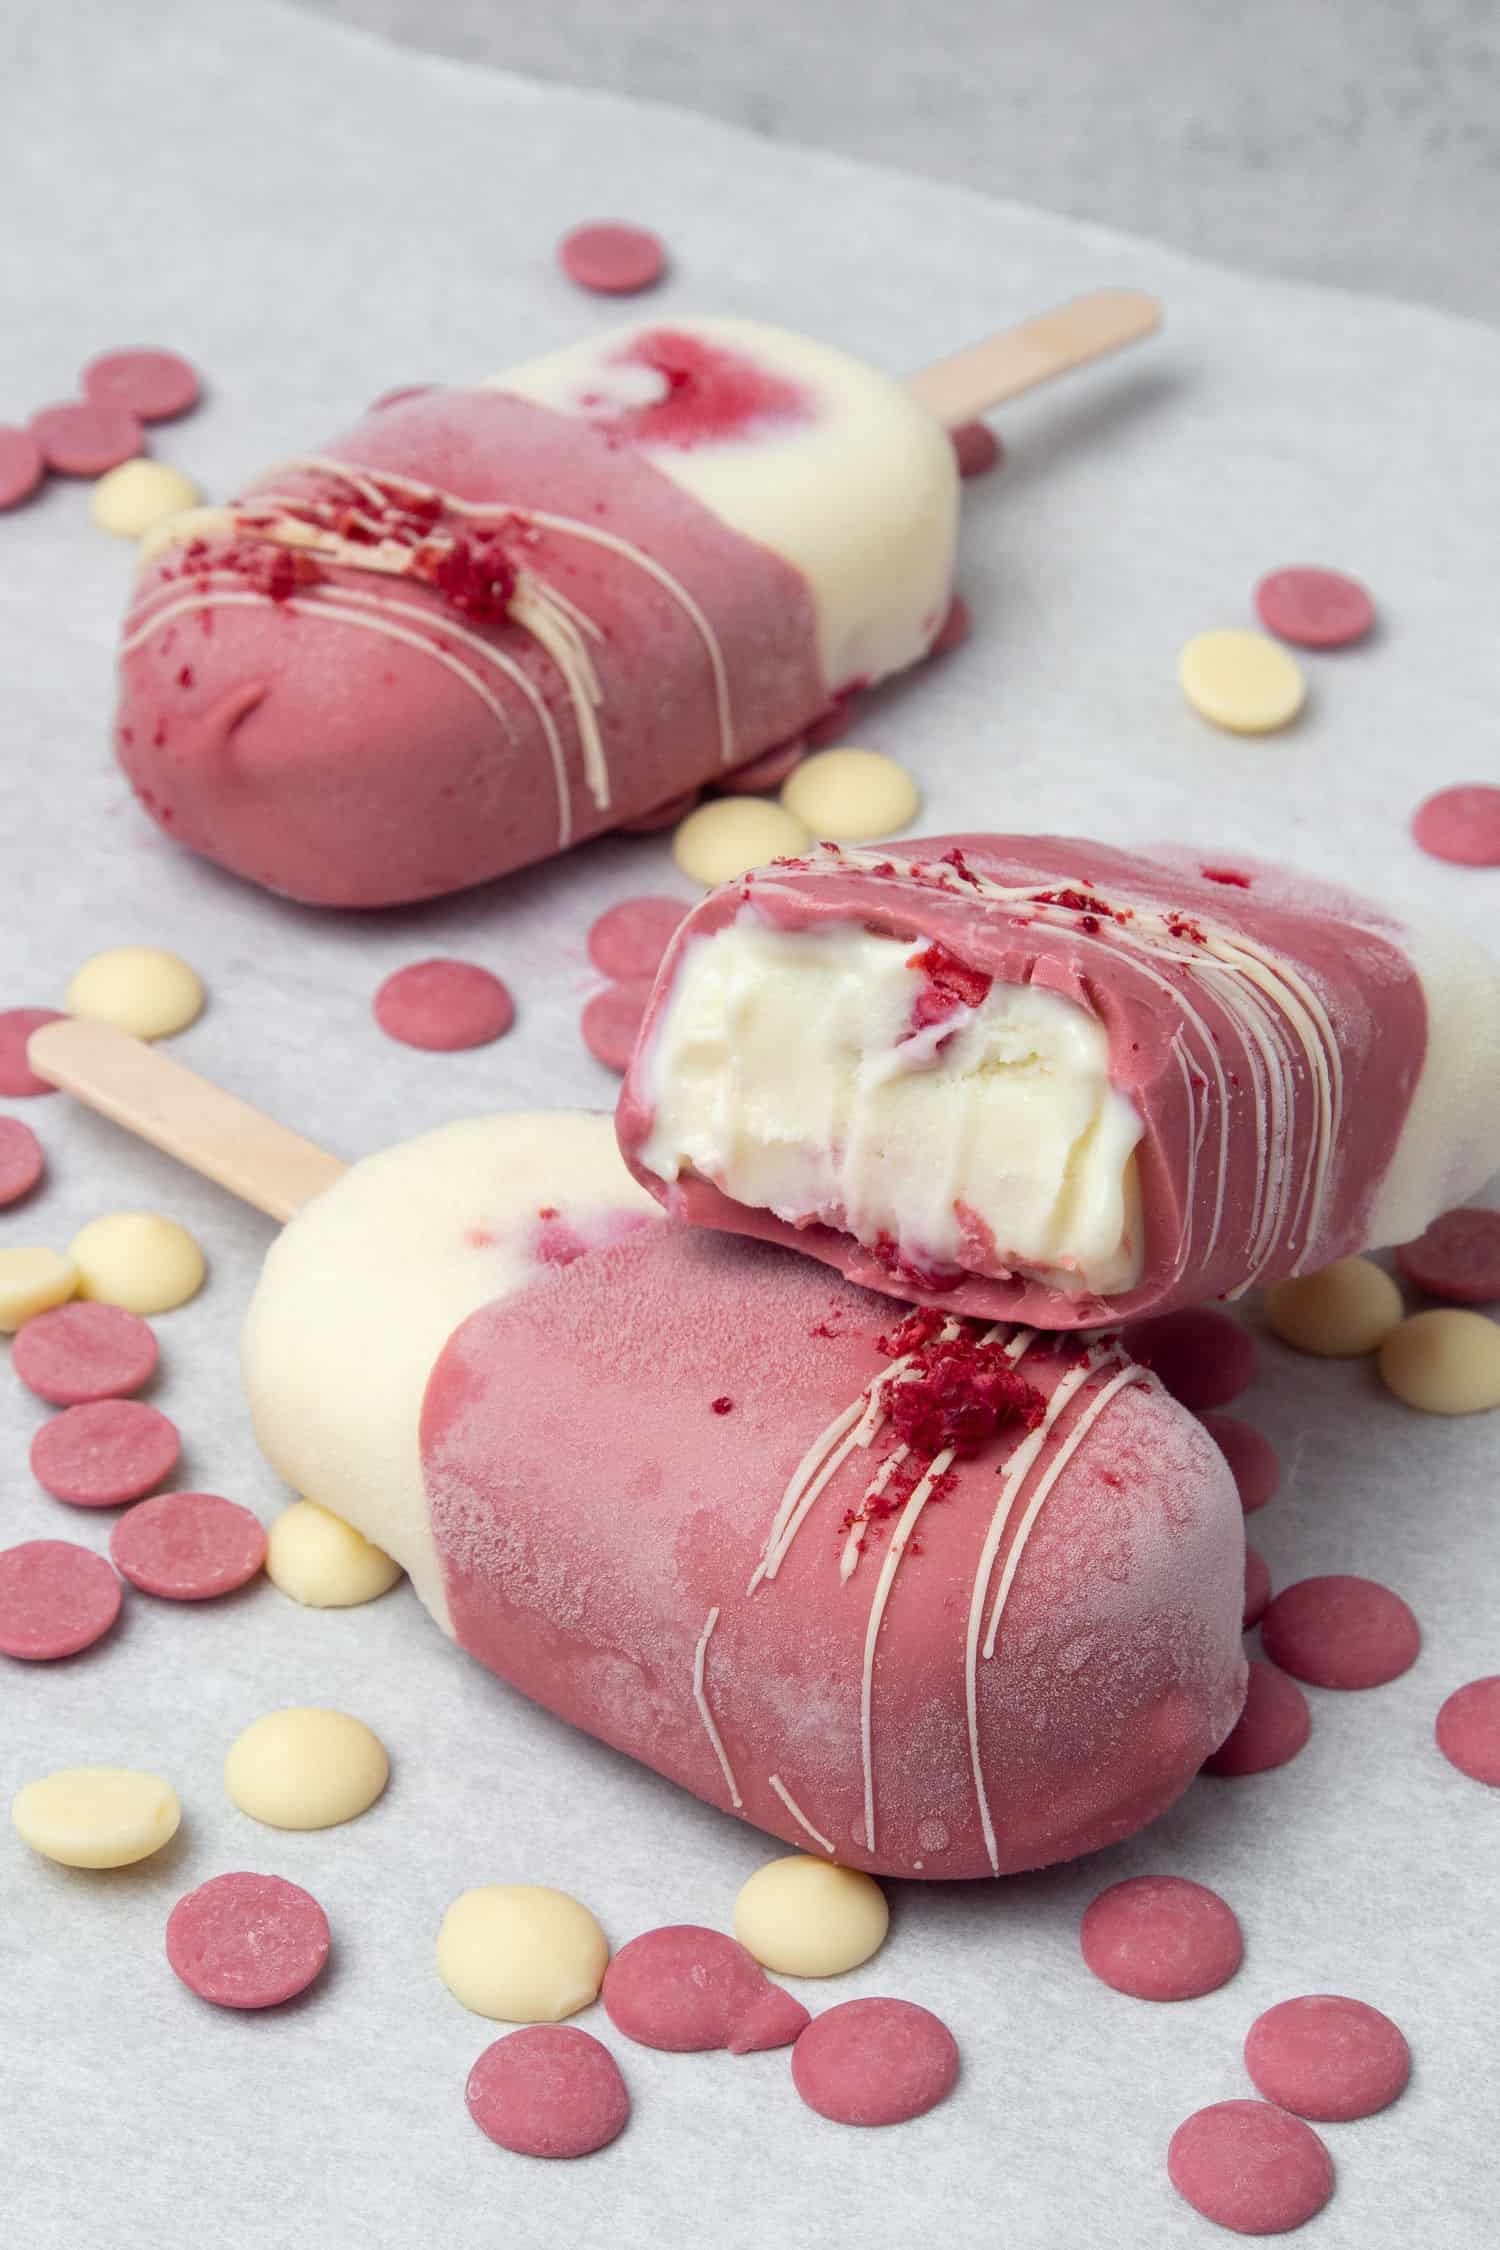 3 pcs of Ruby Raspberry ice cream bars on a white paper. 